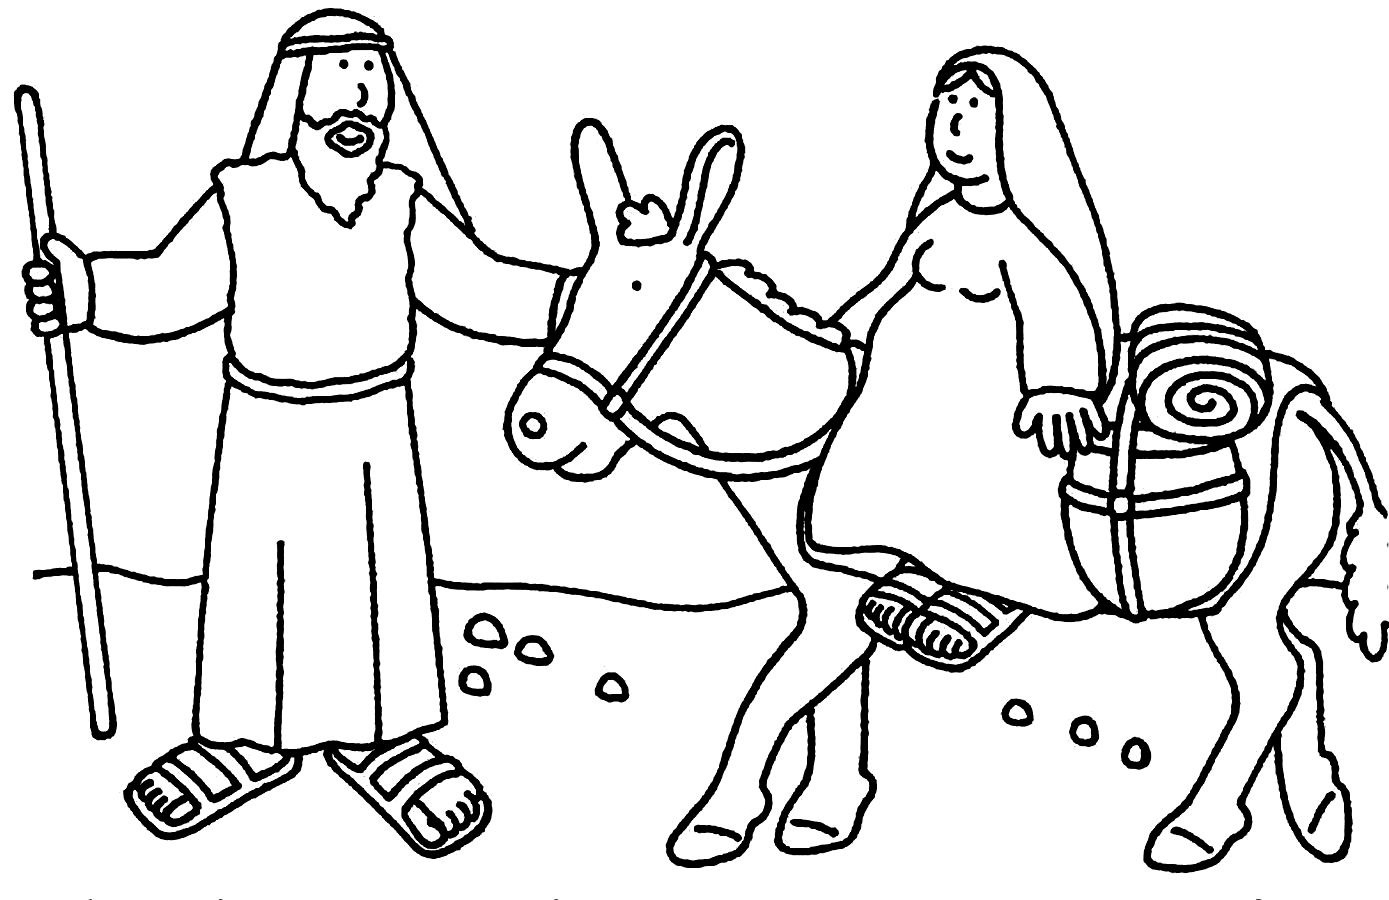 Spanish Christmas Coloring Pages The Best Free Christmas Coloring Coloring Page Images Download From